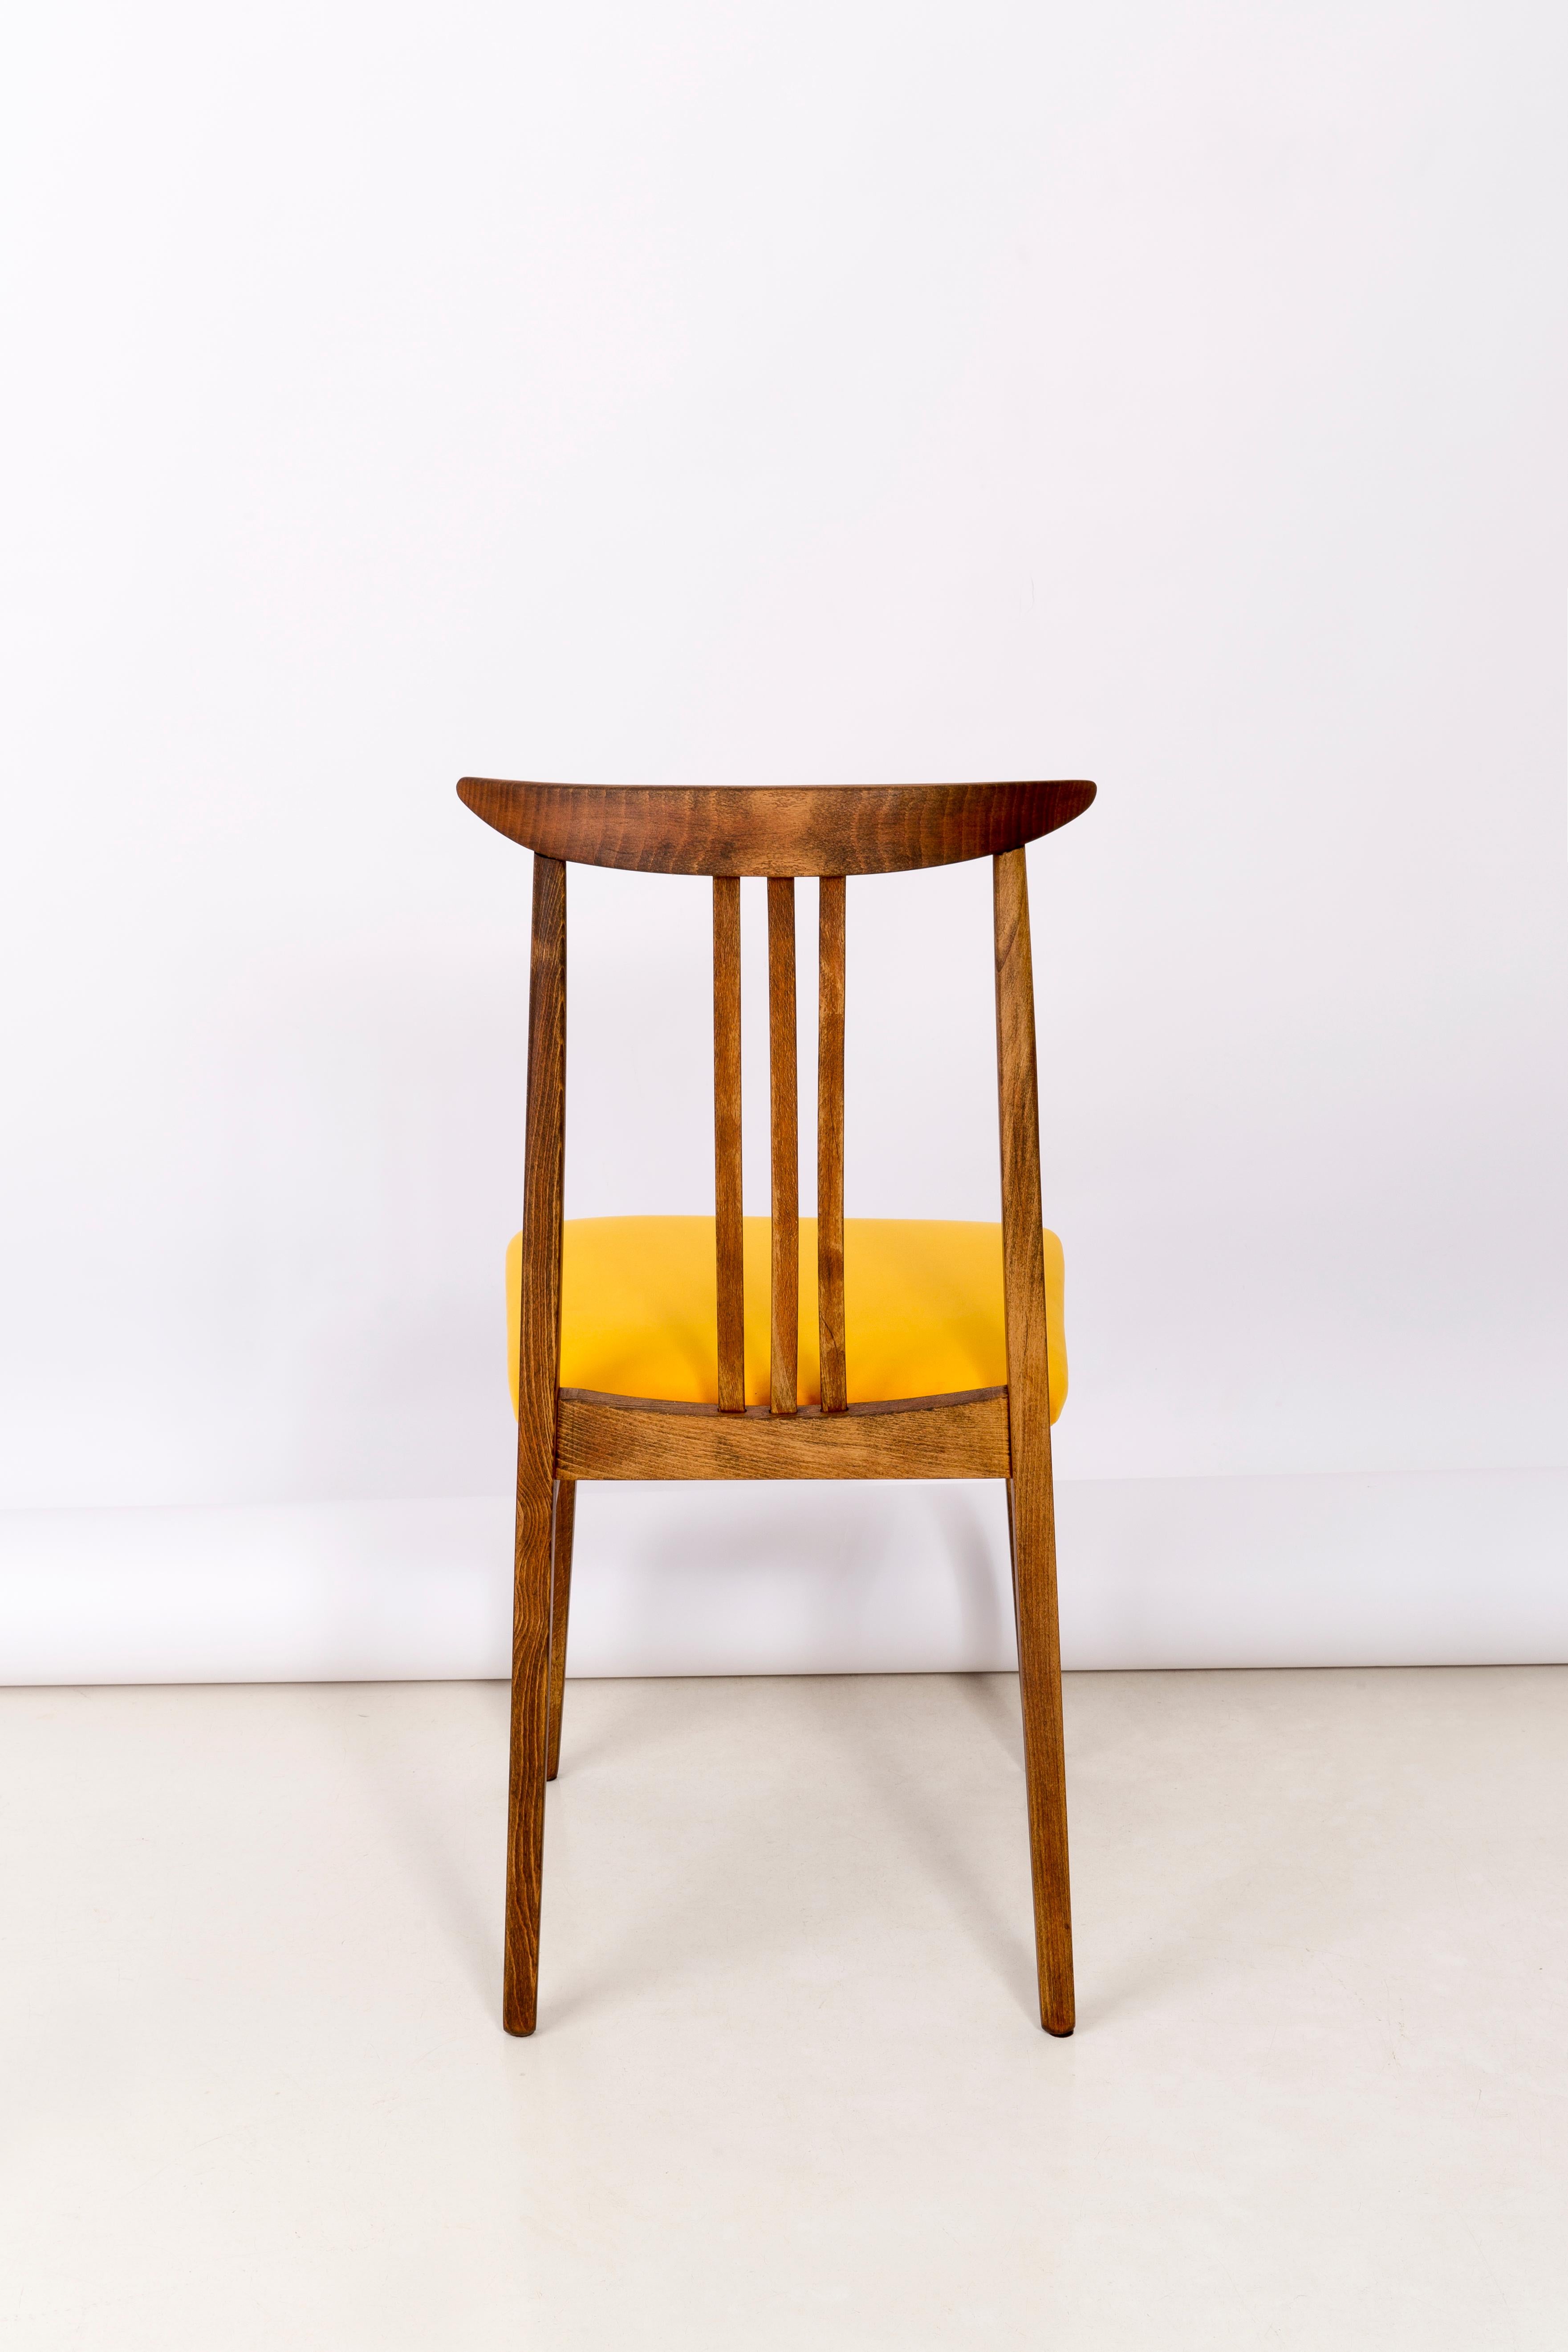 Set of Eight Yellow Chairs, by Zielinski, Europe, 1960s For Sale 4